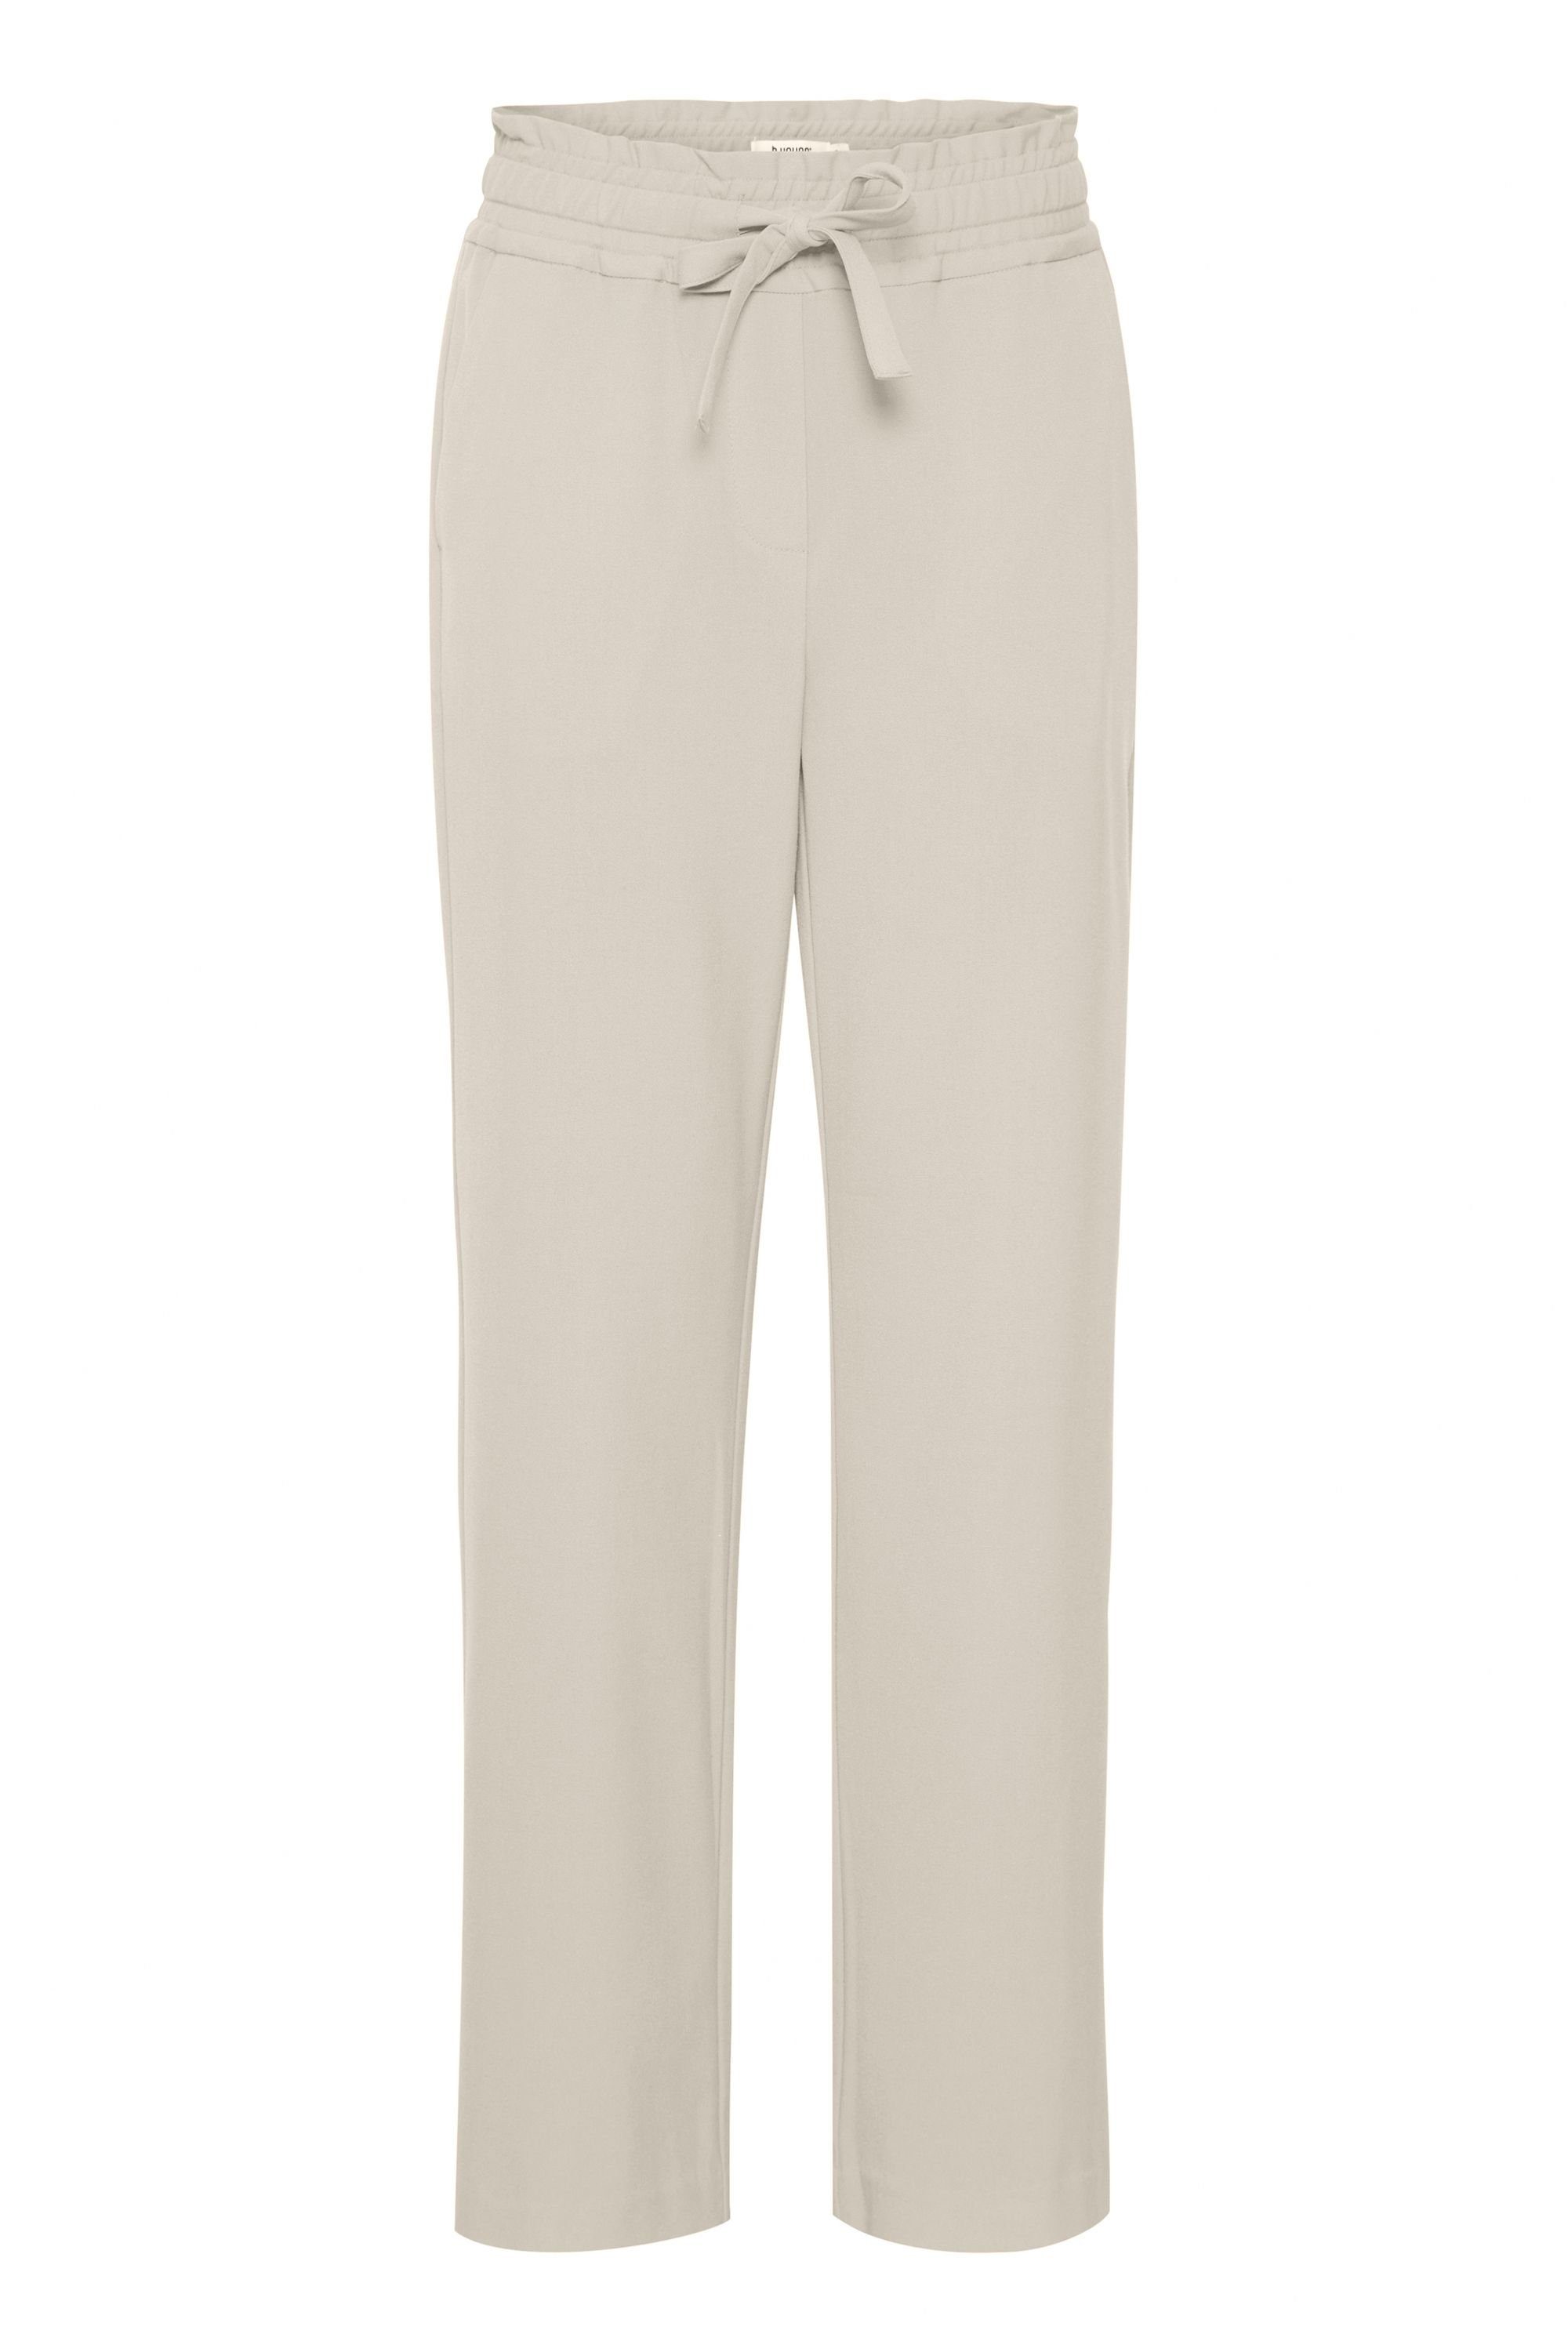 Y BYDANTA PANT (140708) Cement CASUAL b.young 20813077 Jogger - Pants